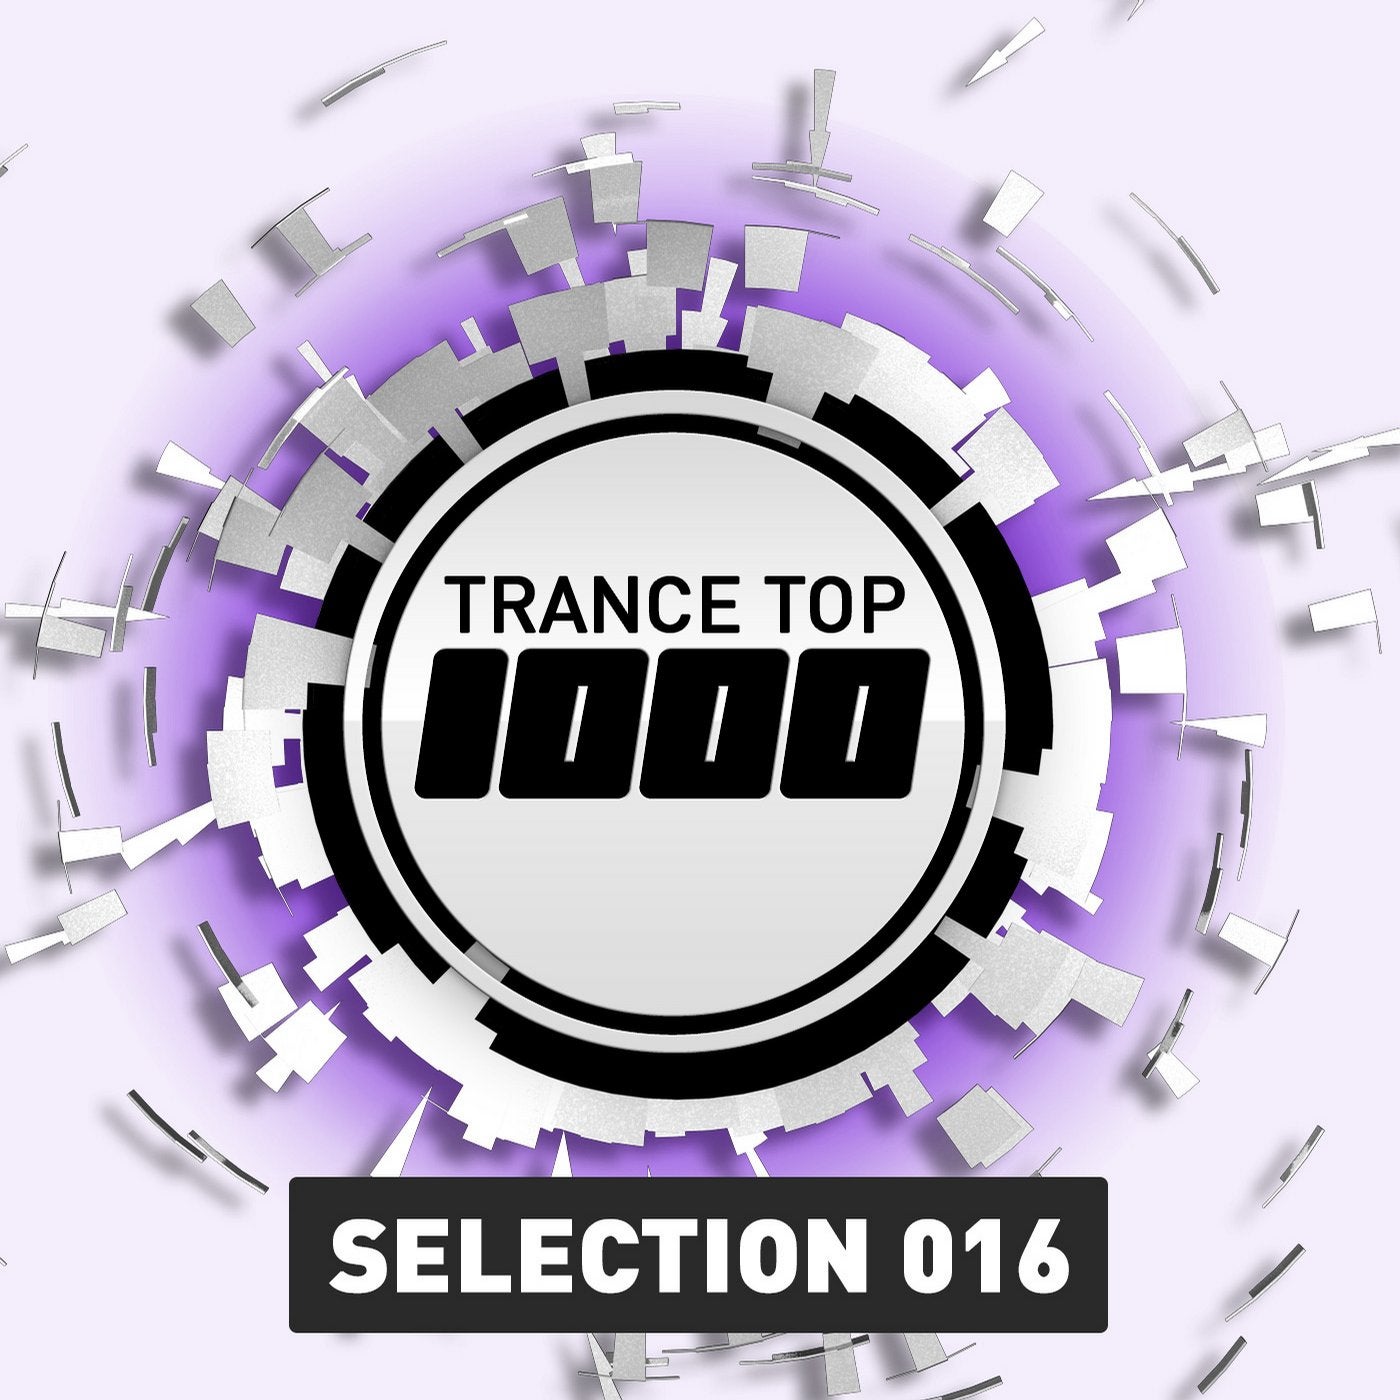 Trance Top 1000 Selection, Vol. 16 - Extended Versions